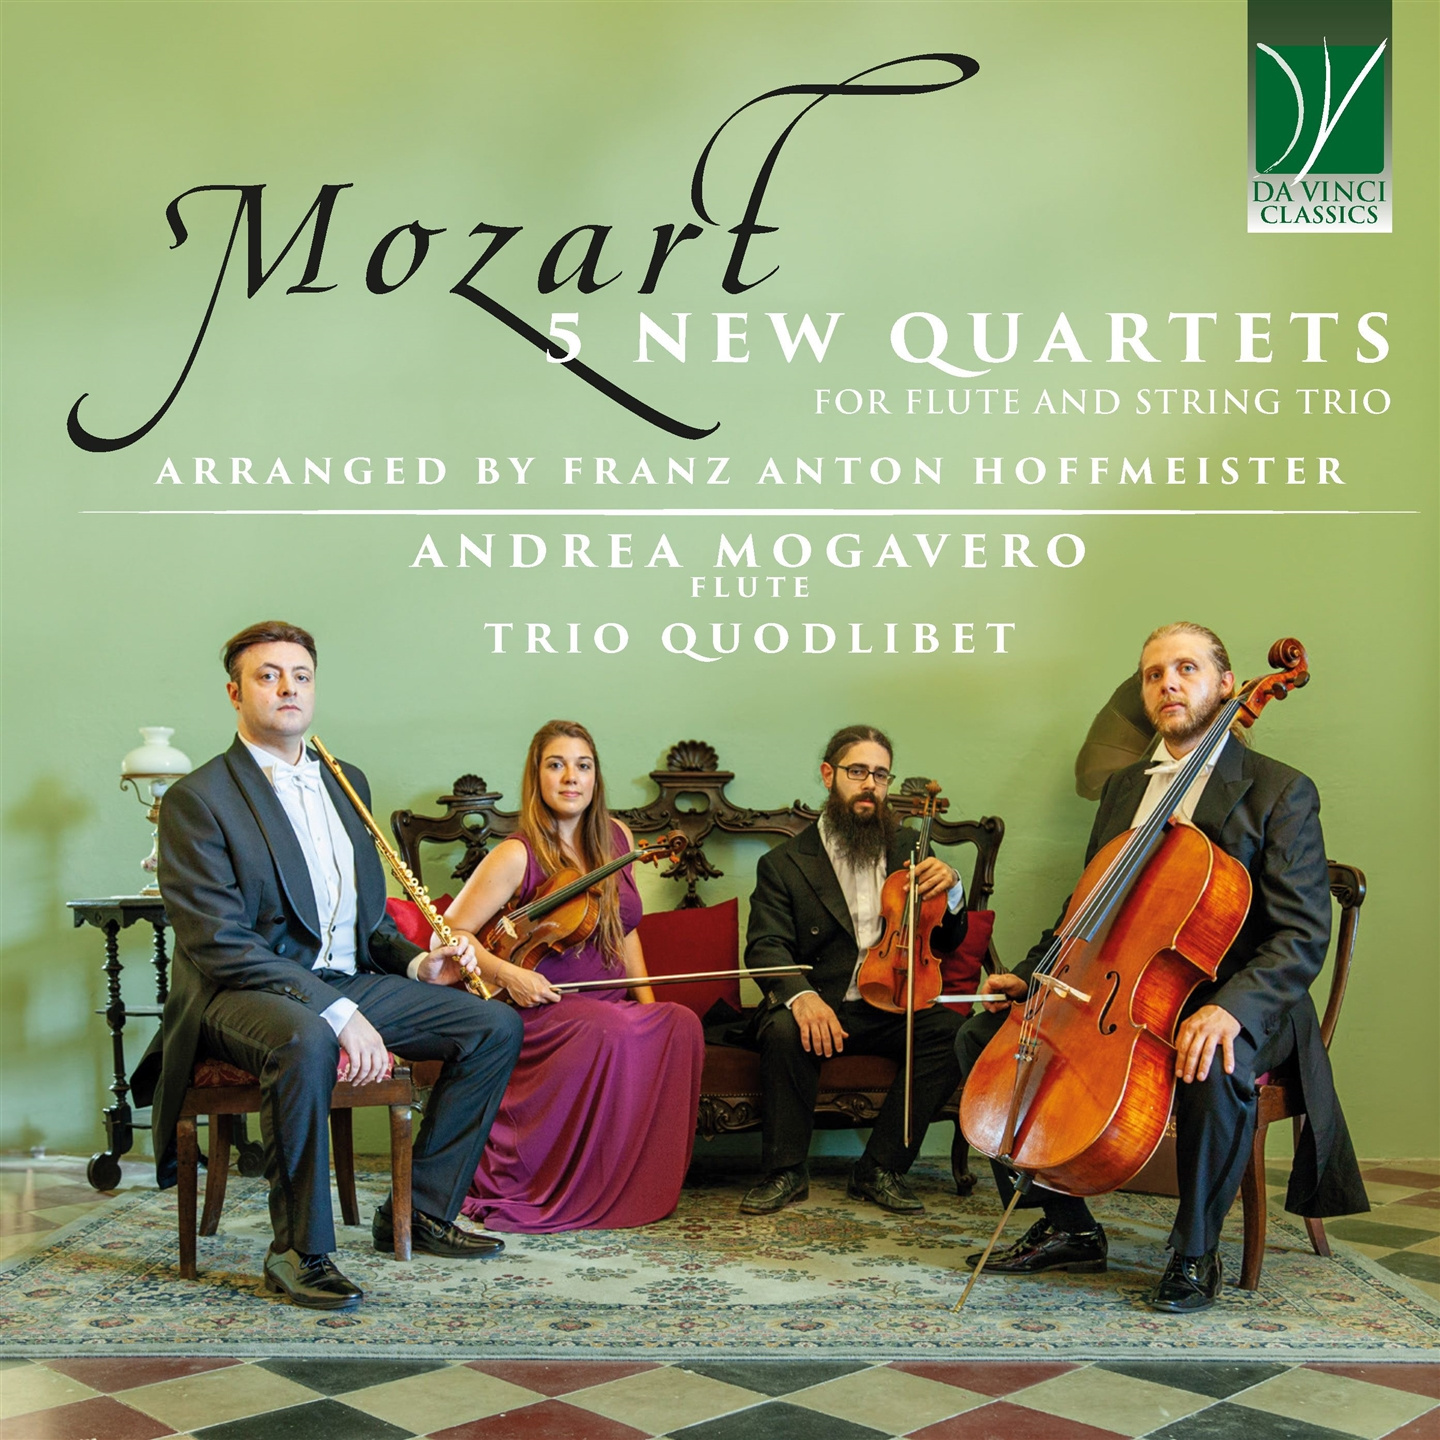 WOLFGANG AMADEUS MOZART: 5 NEW QUARTETS FOR FLUTE AND STRING TRIO, ARRANGED BY